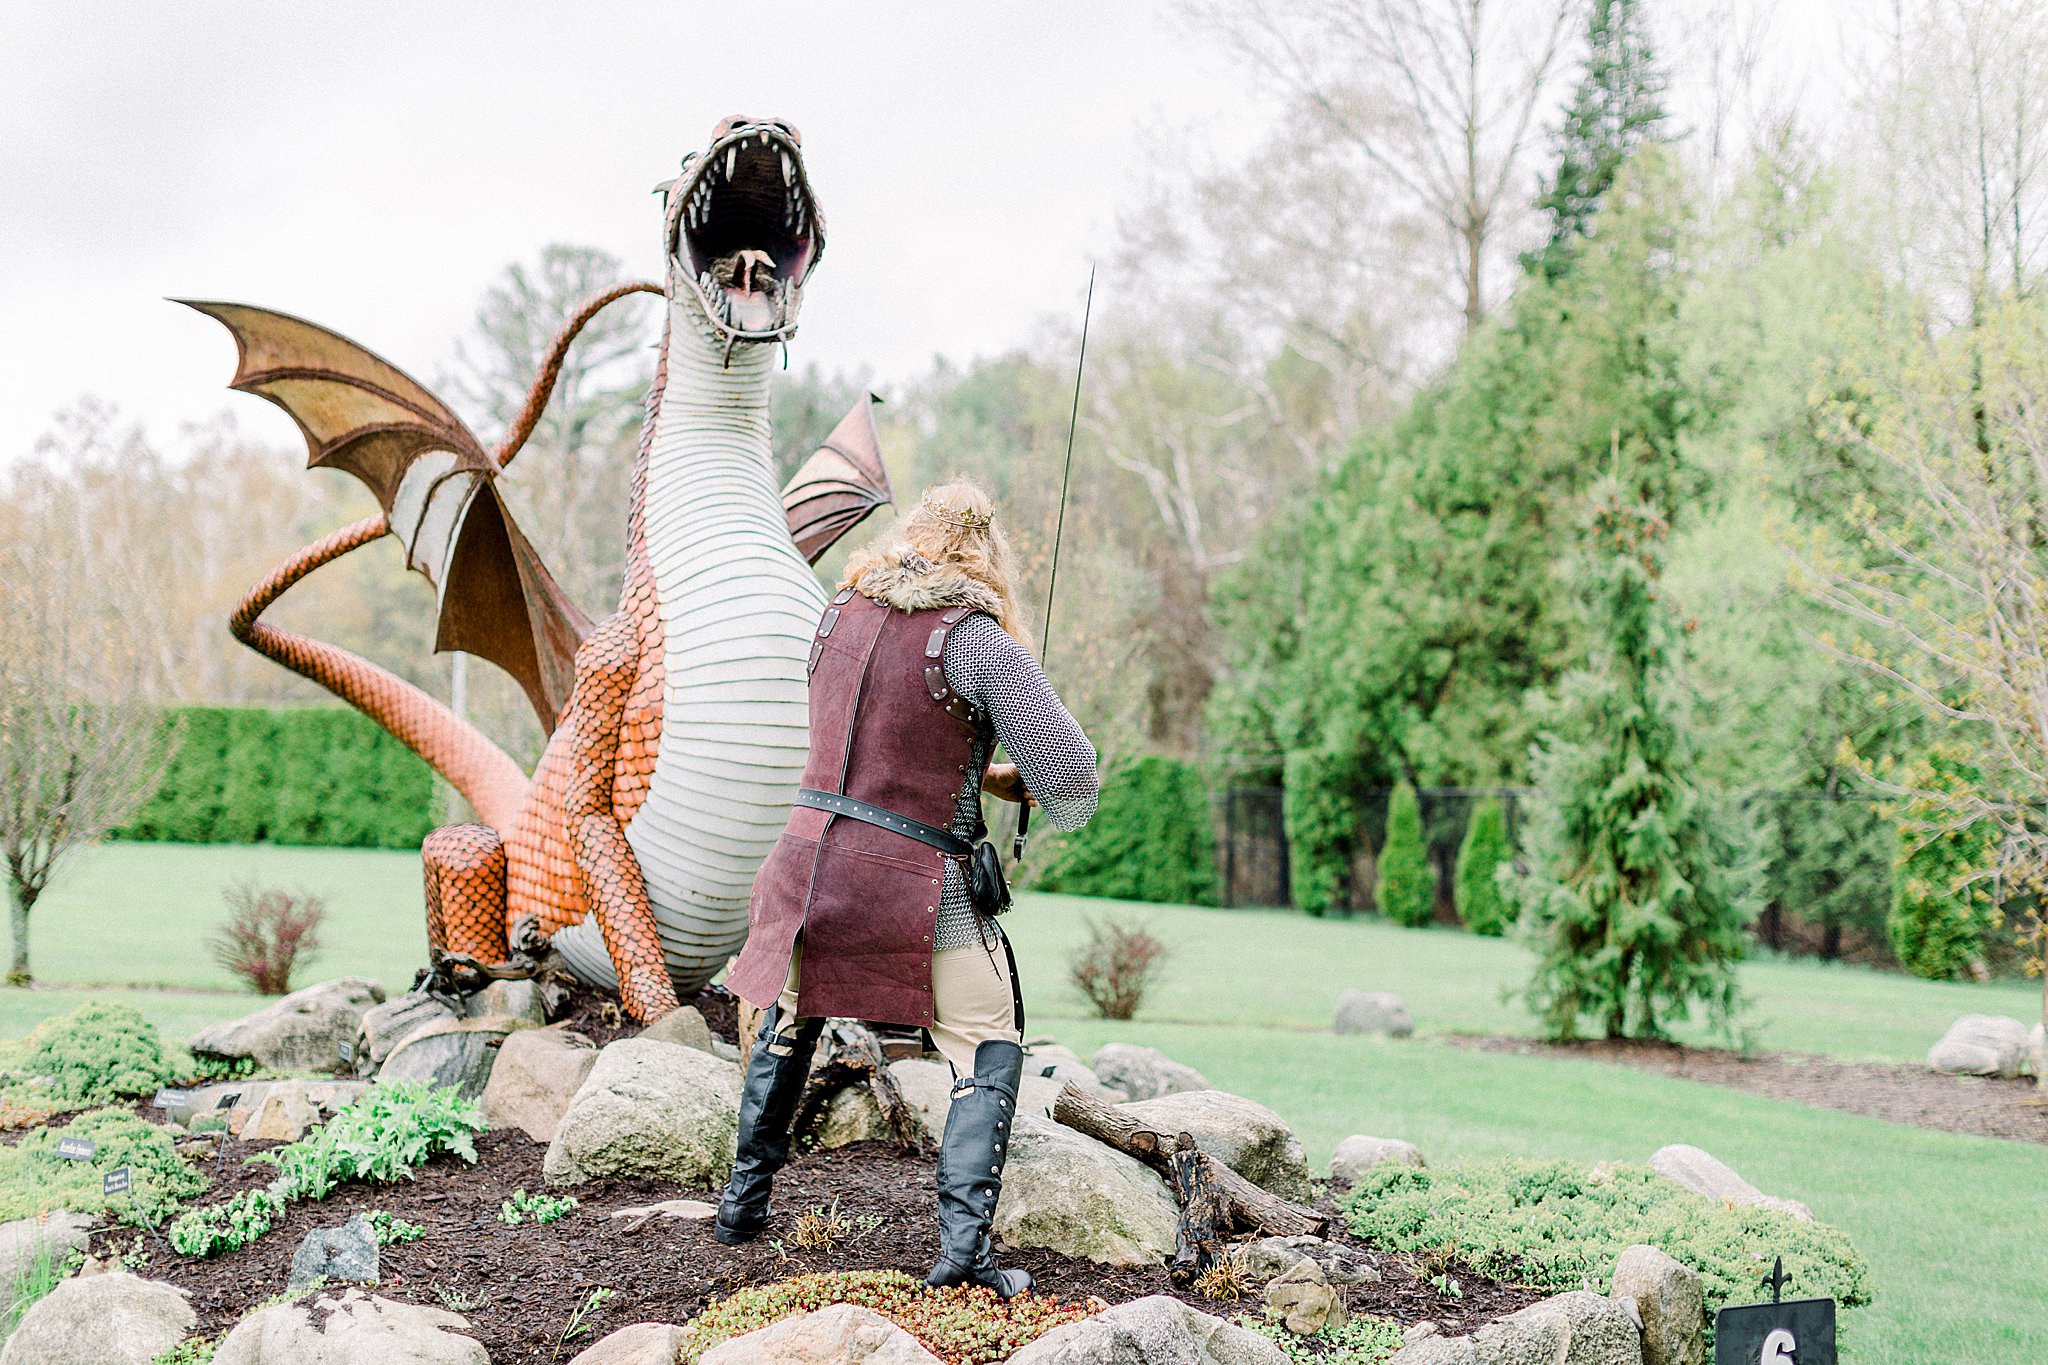 Game of Thrones wedding groom fights dragon at Castle Farms in Charlevoix, Michigan.